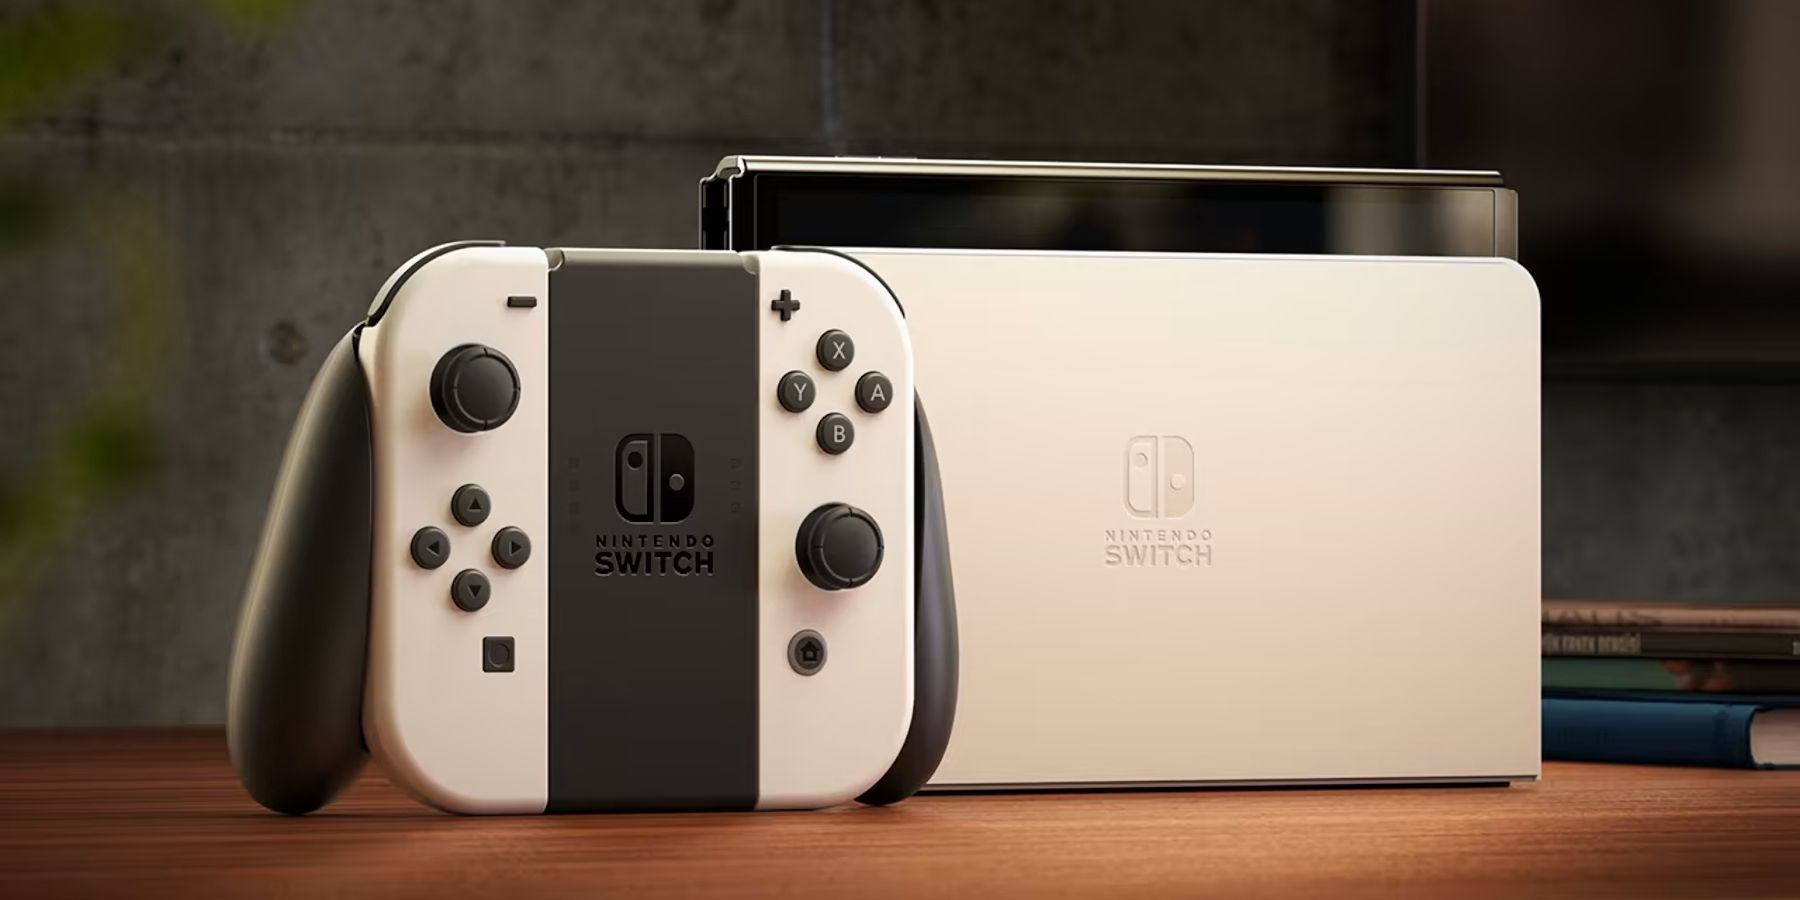 Nintendo’s First Special Edition Switch OLED Revealed